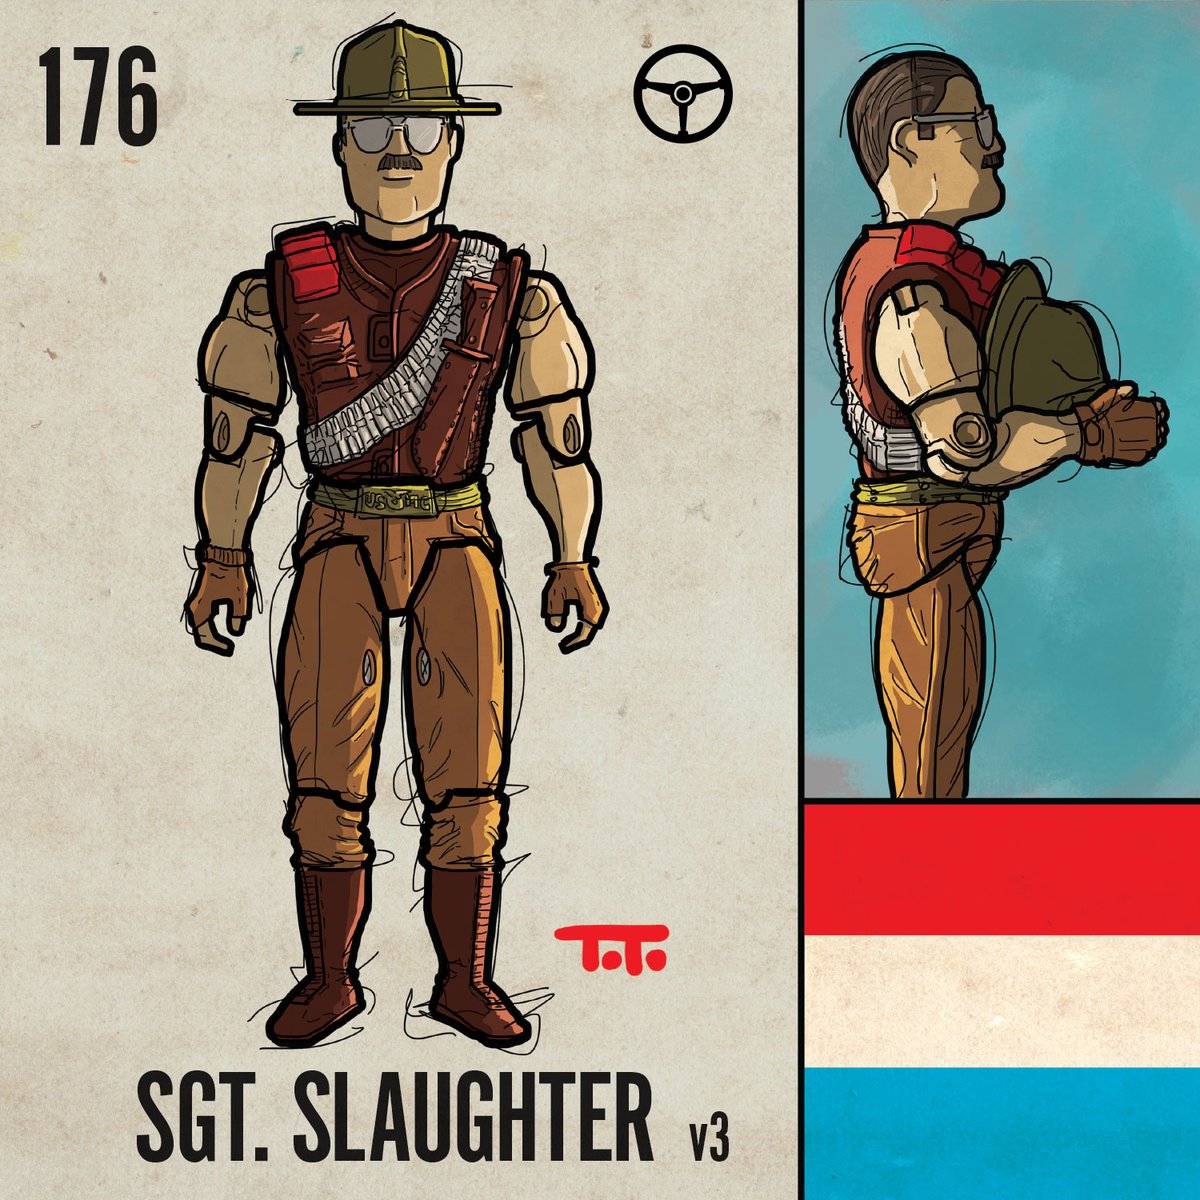 176: “Sgt. Slaughter (v3), G.I. Joe ARAH Series 7, 1988. The Sarge! This is my personal fave version (see v1 & 2 at gijoe365.com). He came with the awesome Warthog vehicle and for the first time: removable hat! Yo joe!
#gijoe365 #sgtslaughter #fanart CC: @_SgtSlaughter